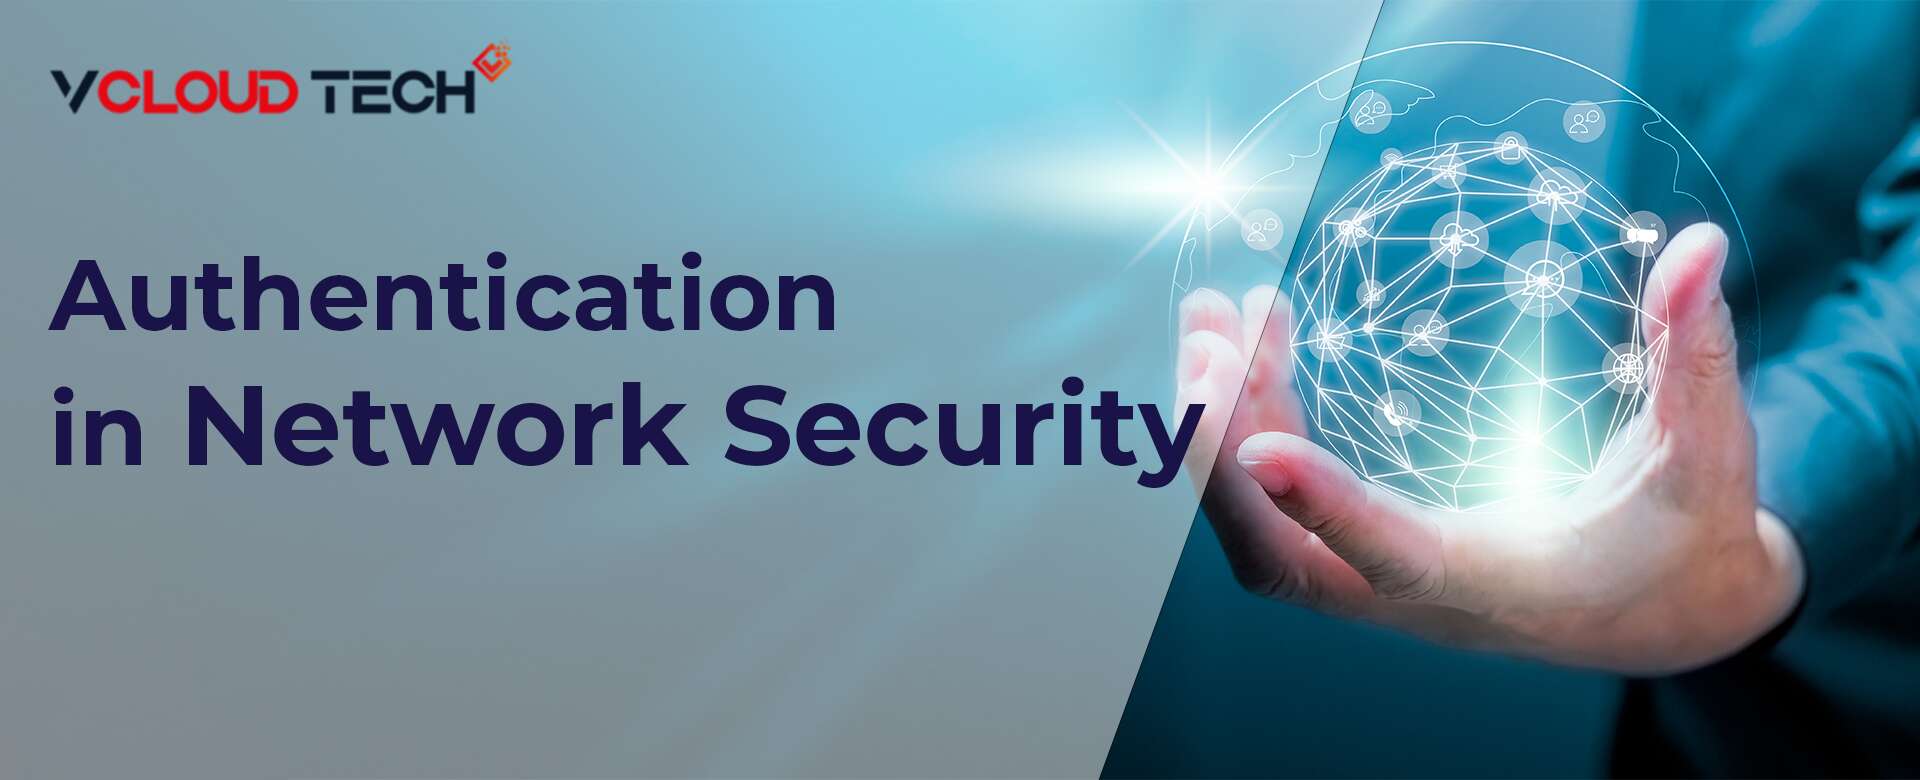 Authentication in Network Security